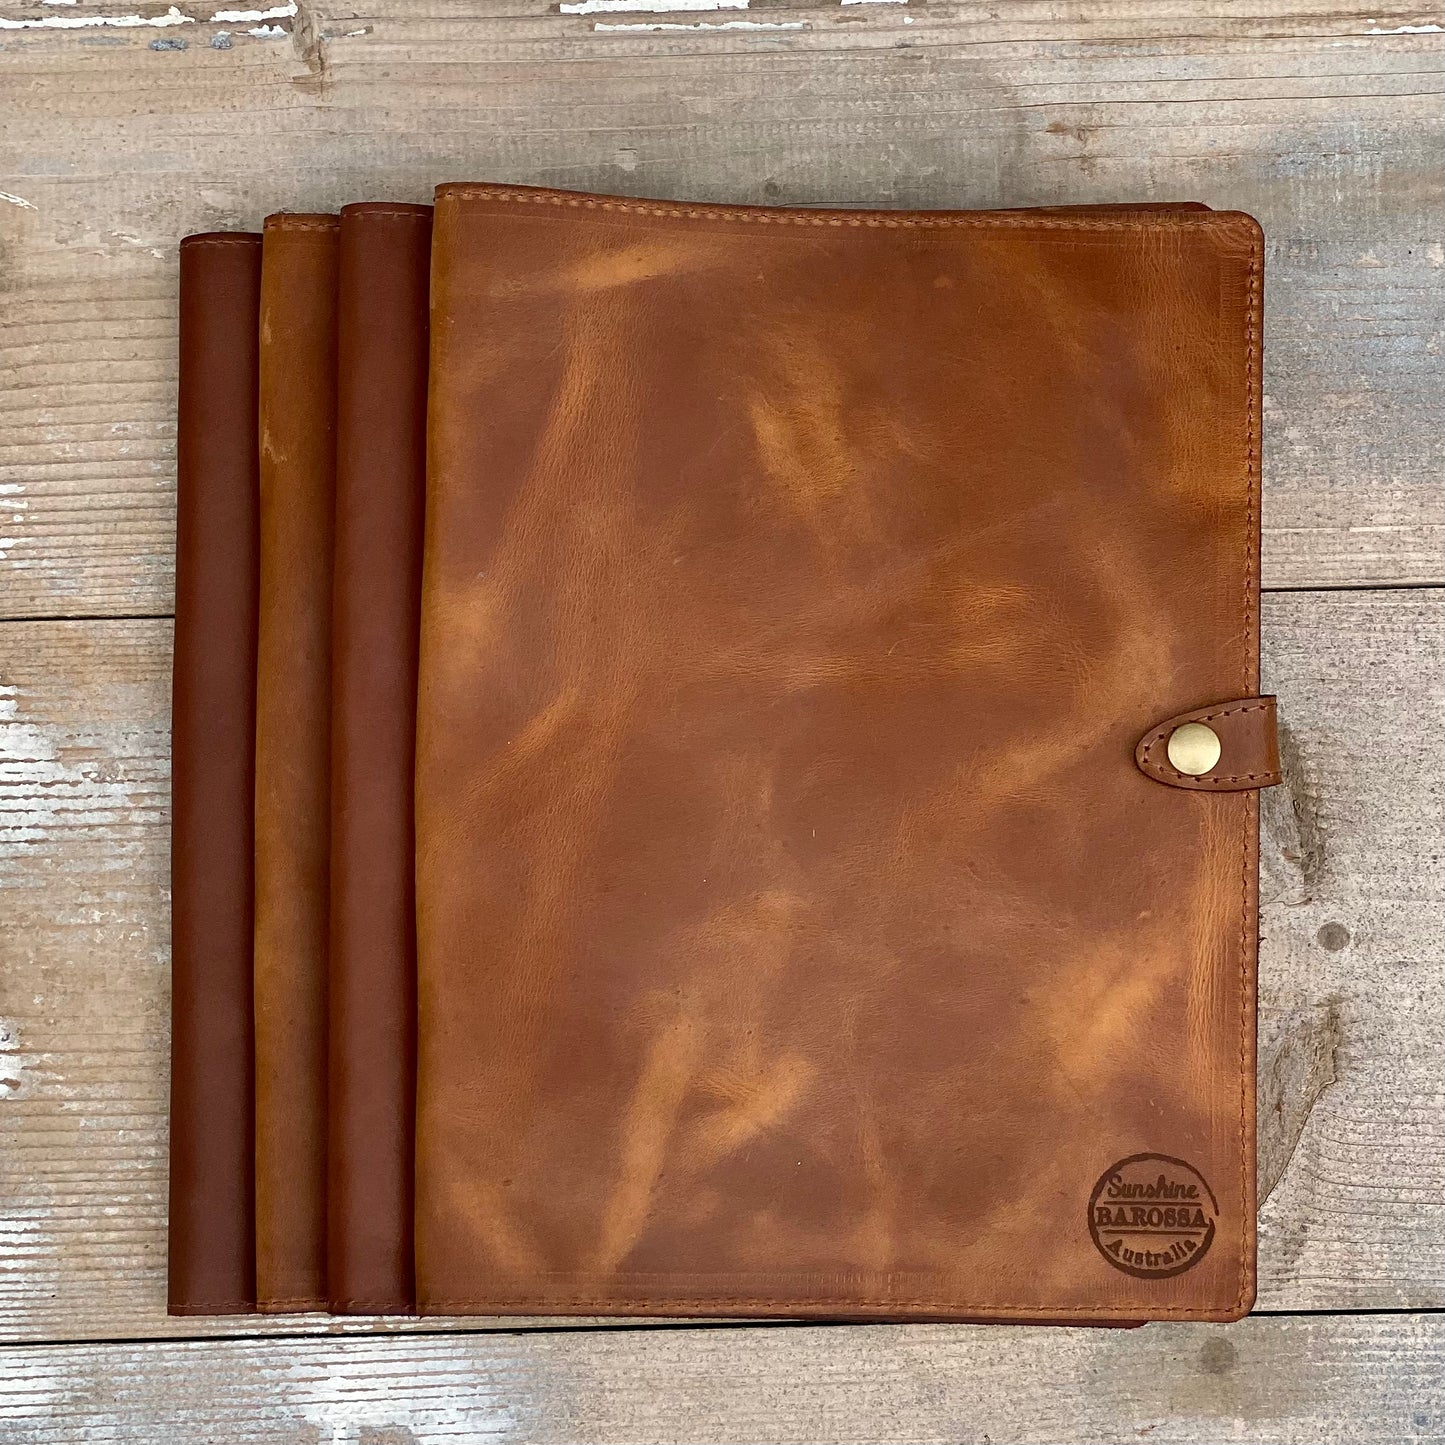 Leather Journal Cover / Compendium - A4